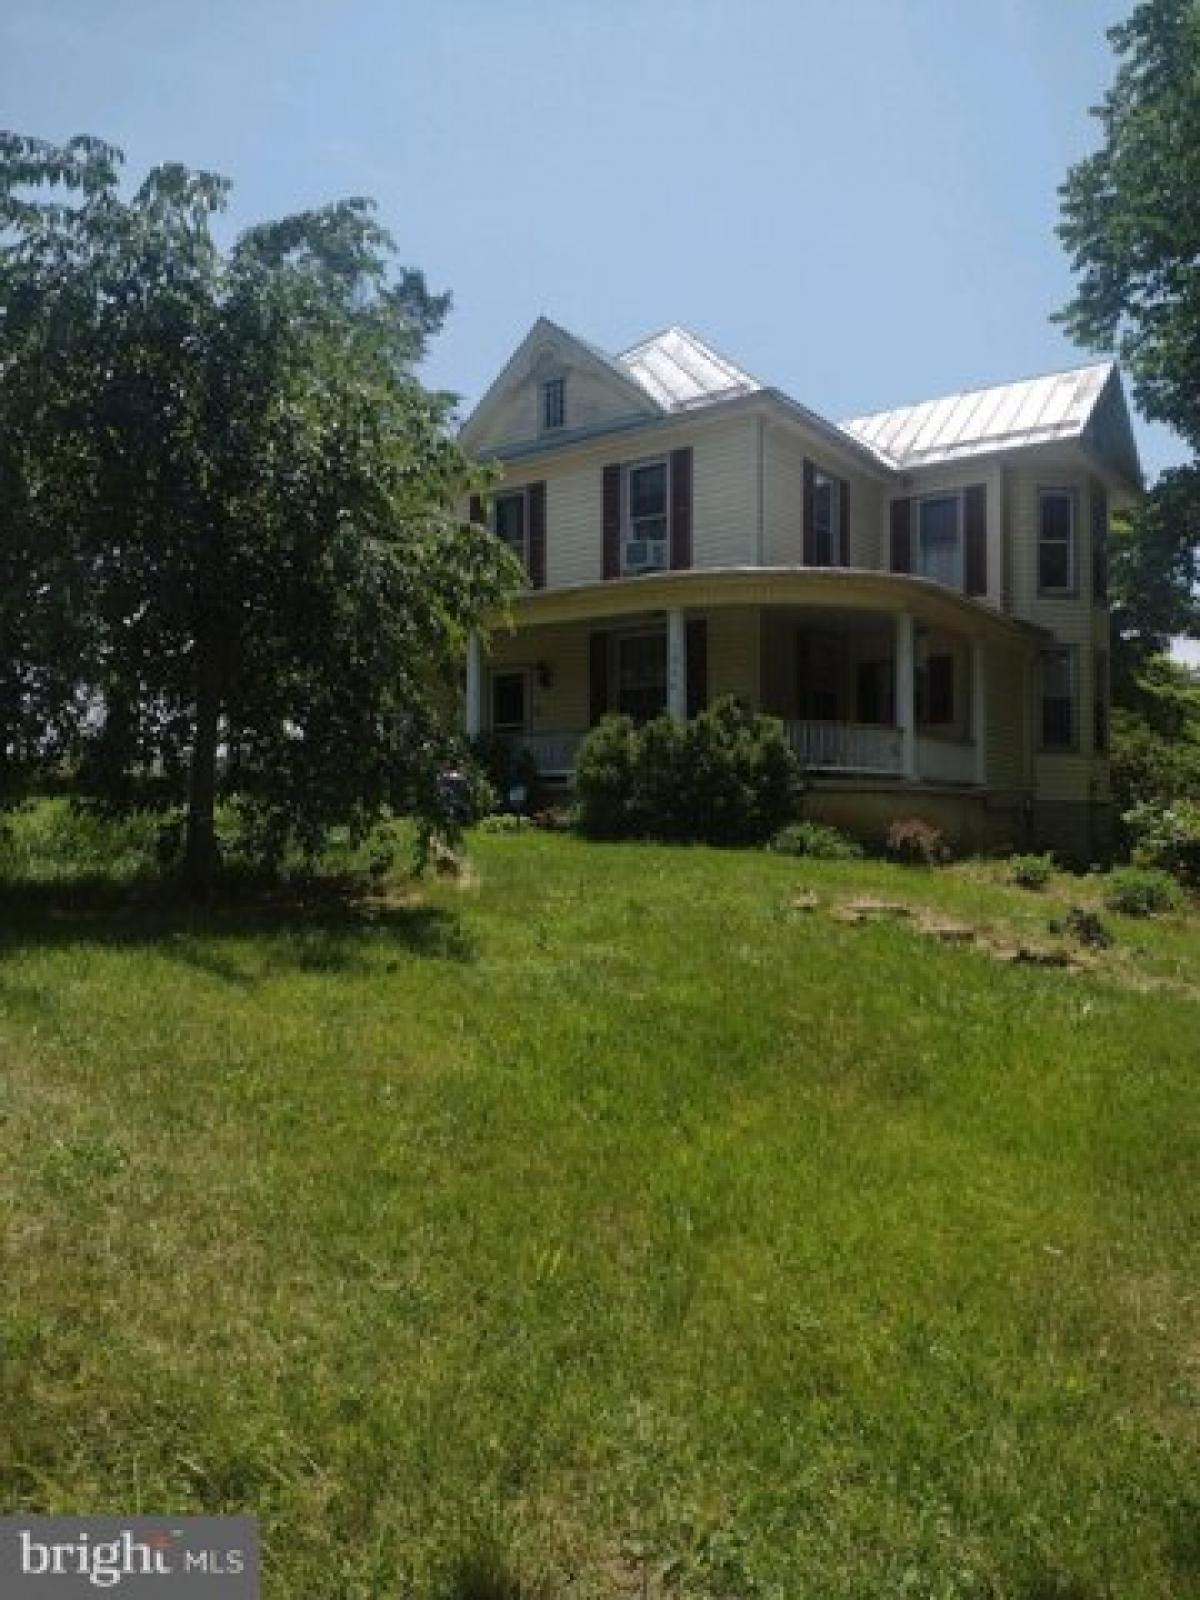 Picture of Home For Sale in Maurertown, Virginia, United States